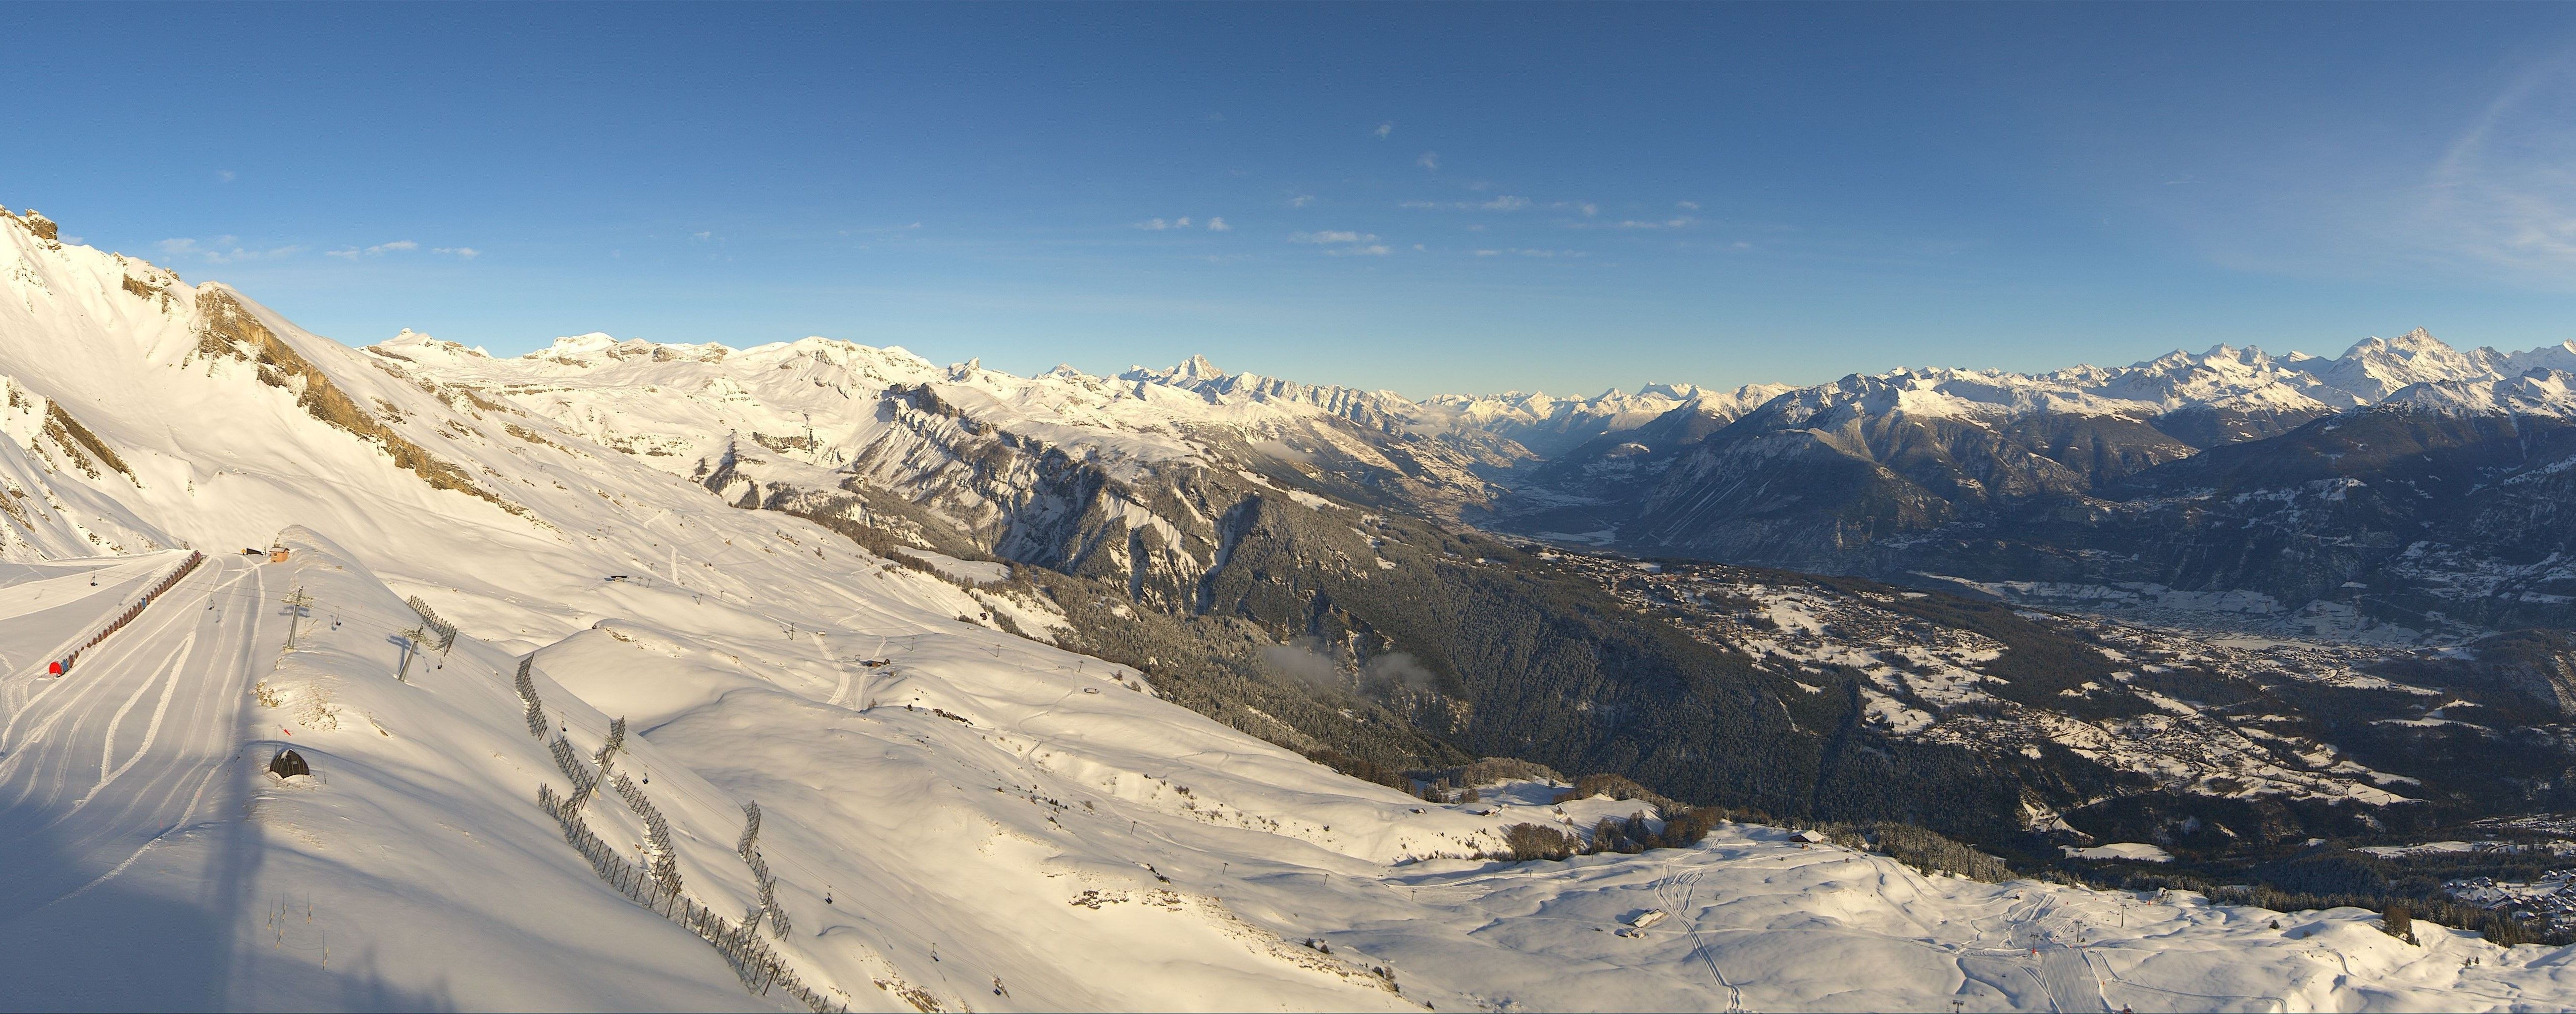 Beautiful today in Anzère (pre-opening 8-12 December) (roundshot.com)